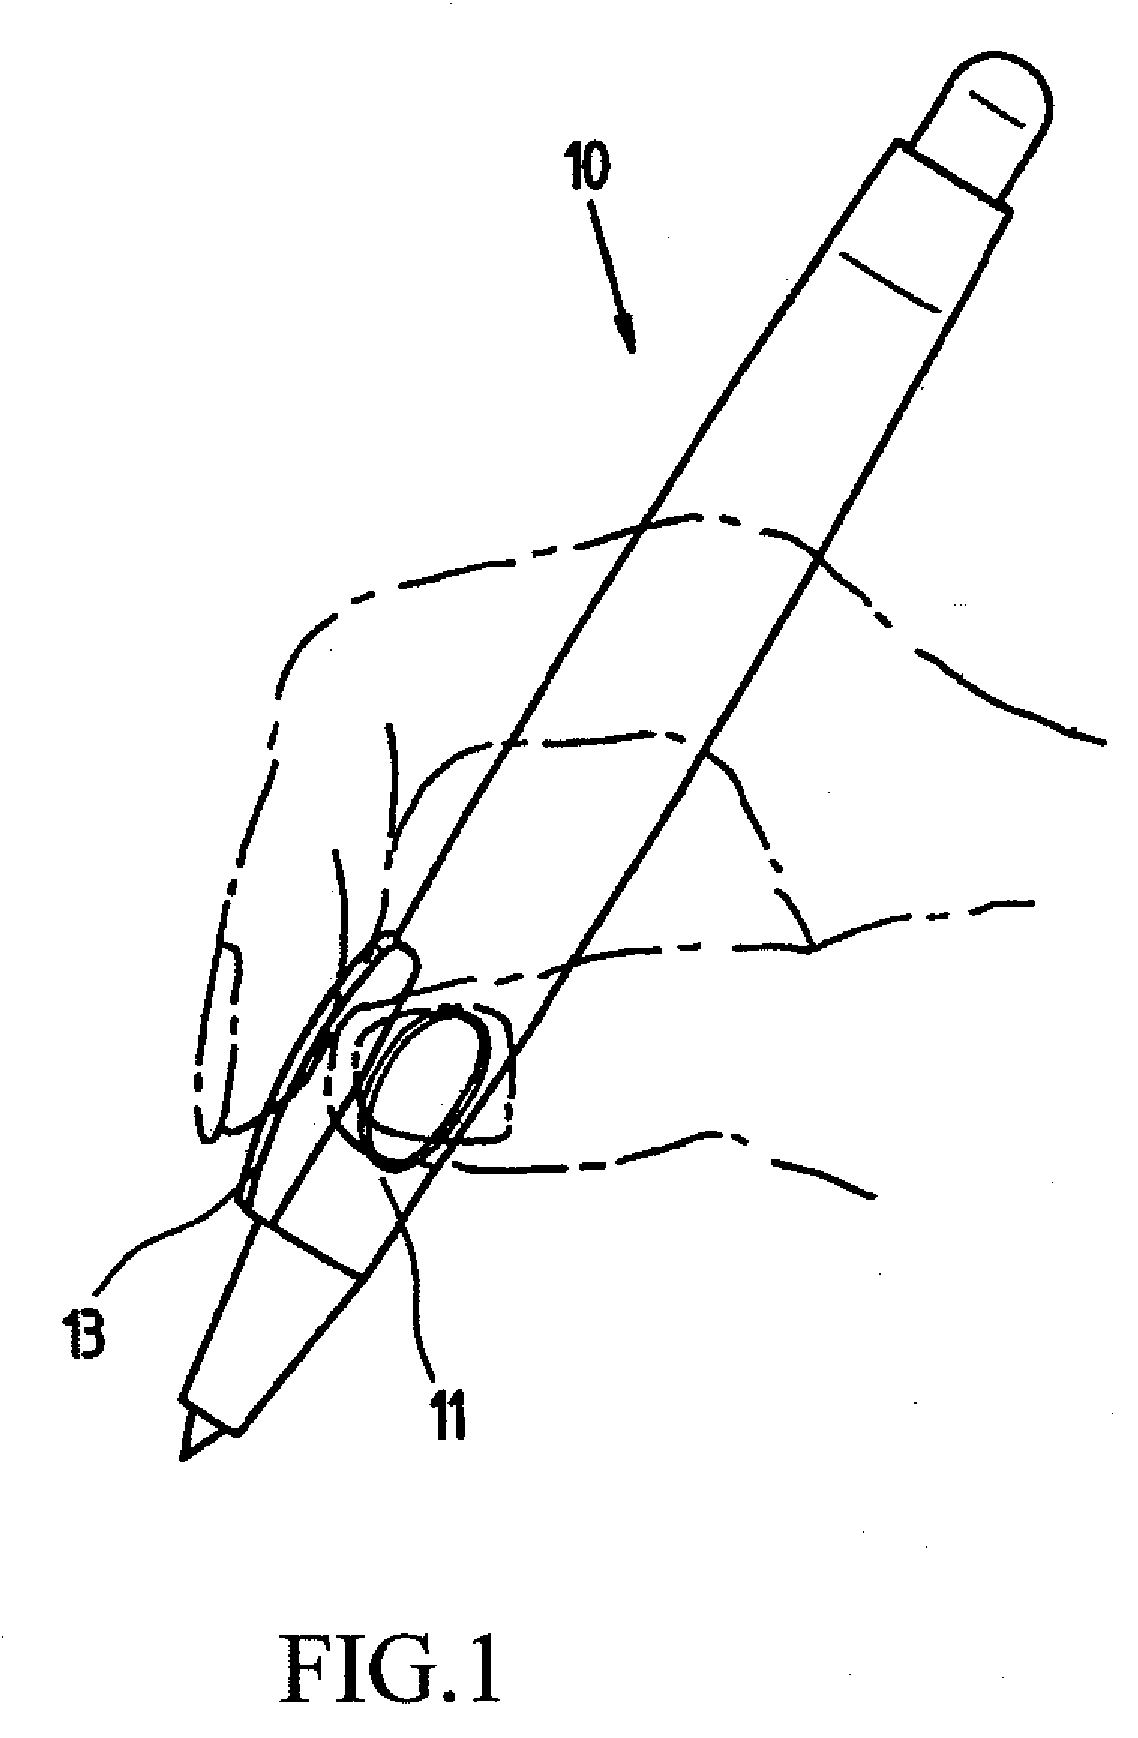 Ergonomic Pen with Convex Device for Index Finger Exerting Force Thereon